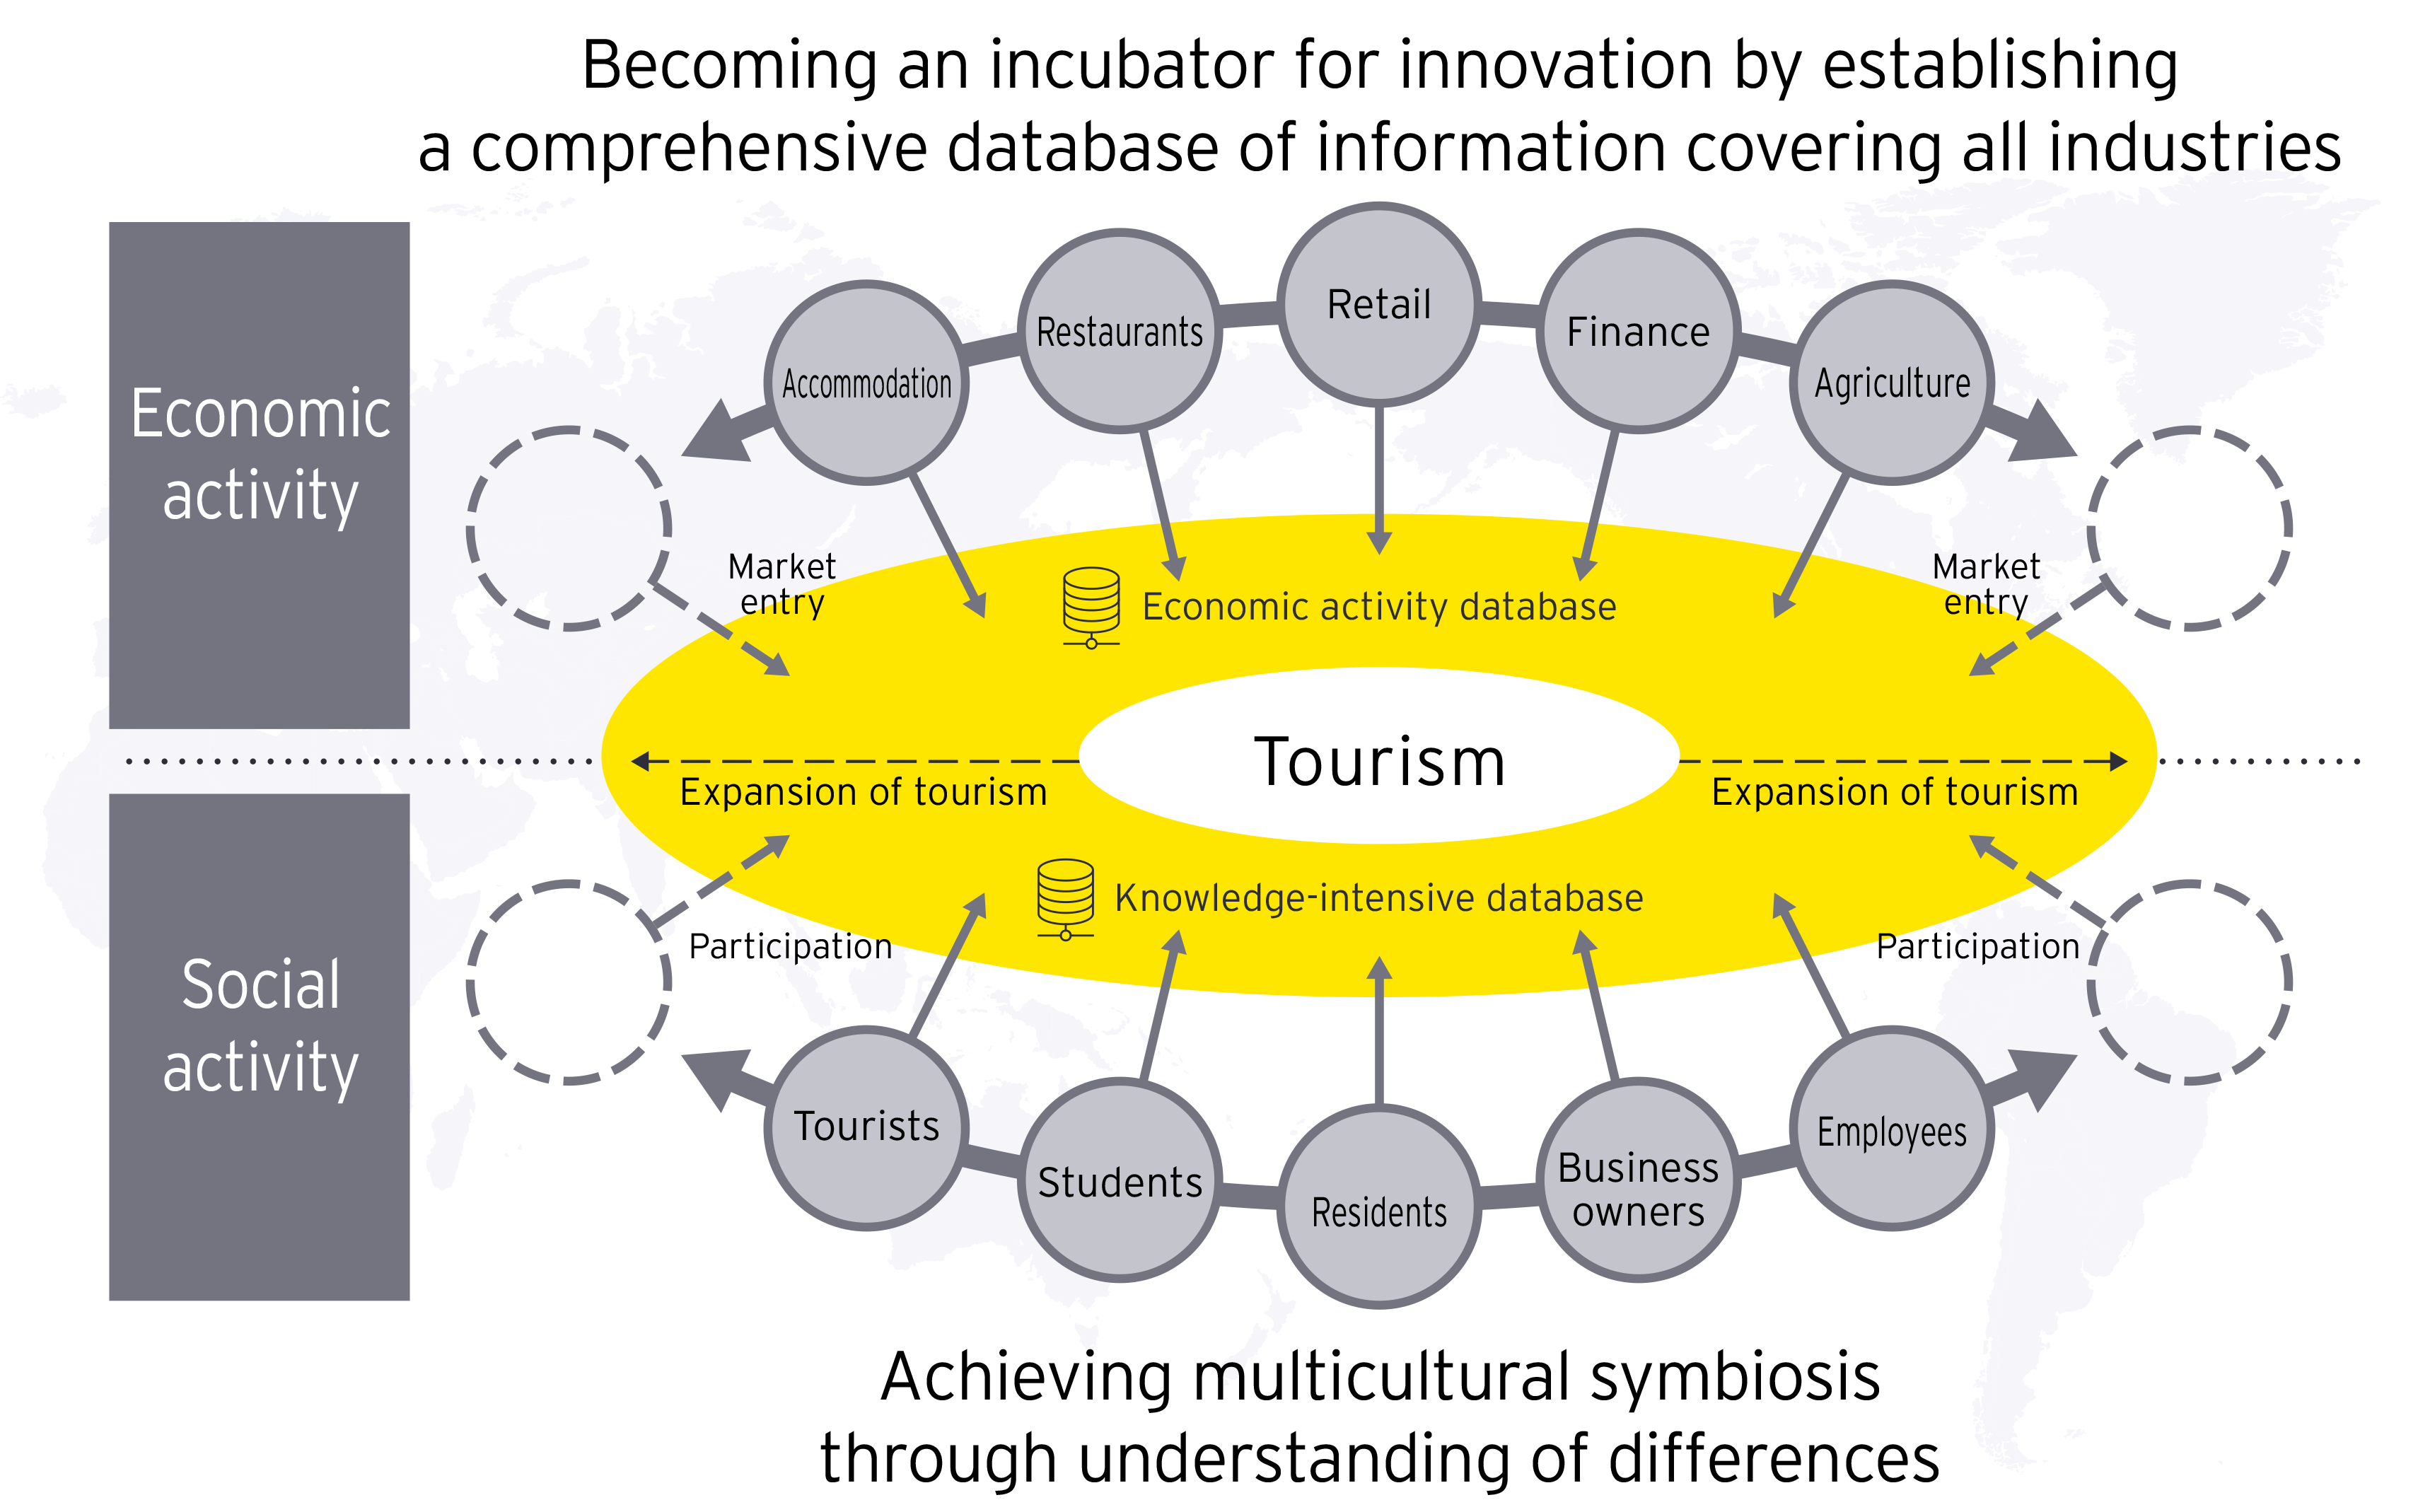 Figure 2: Towards an innovation incubator by creating a database that includes information from all industries